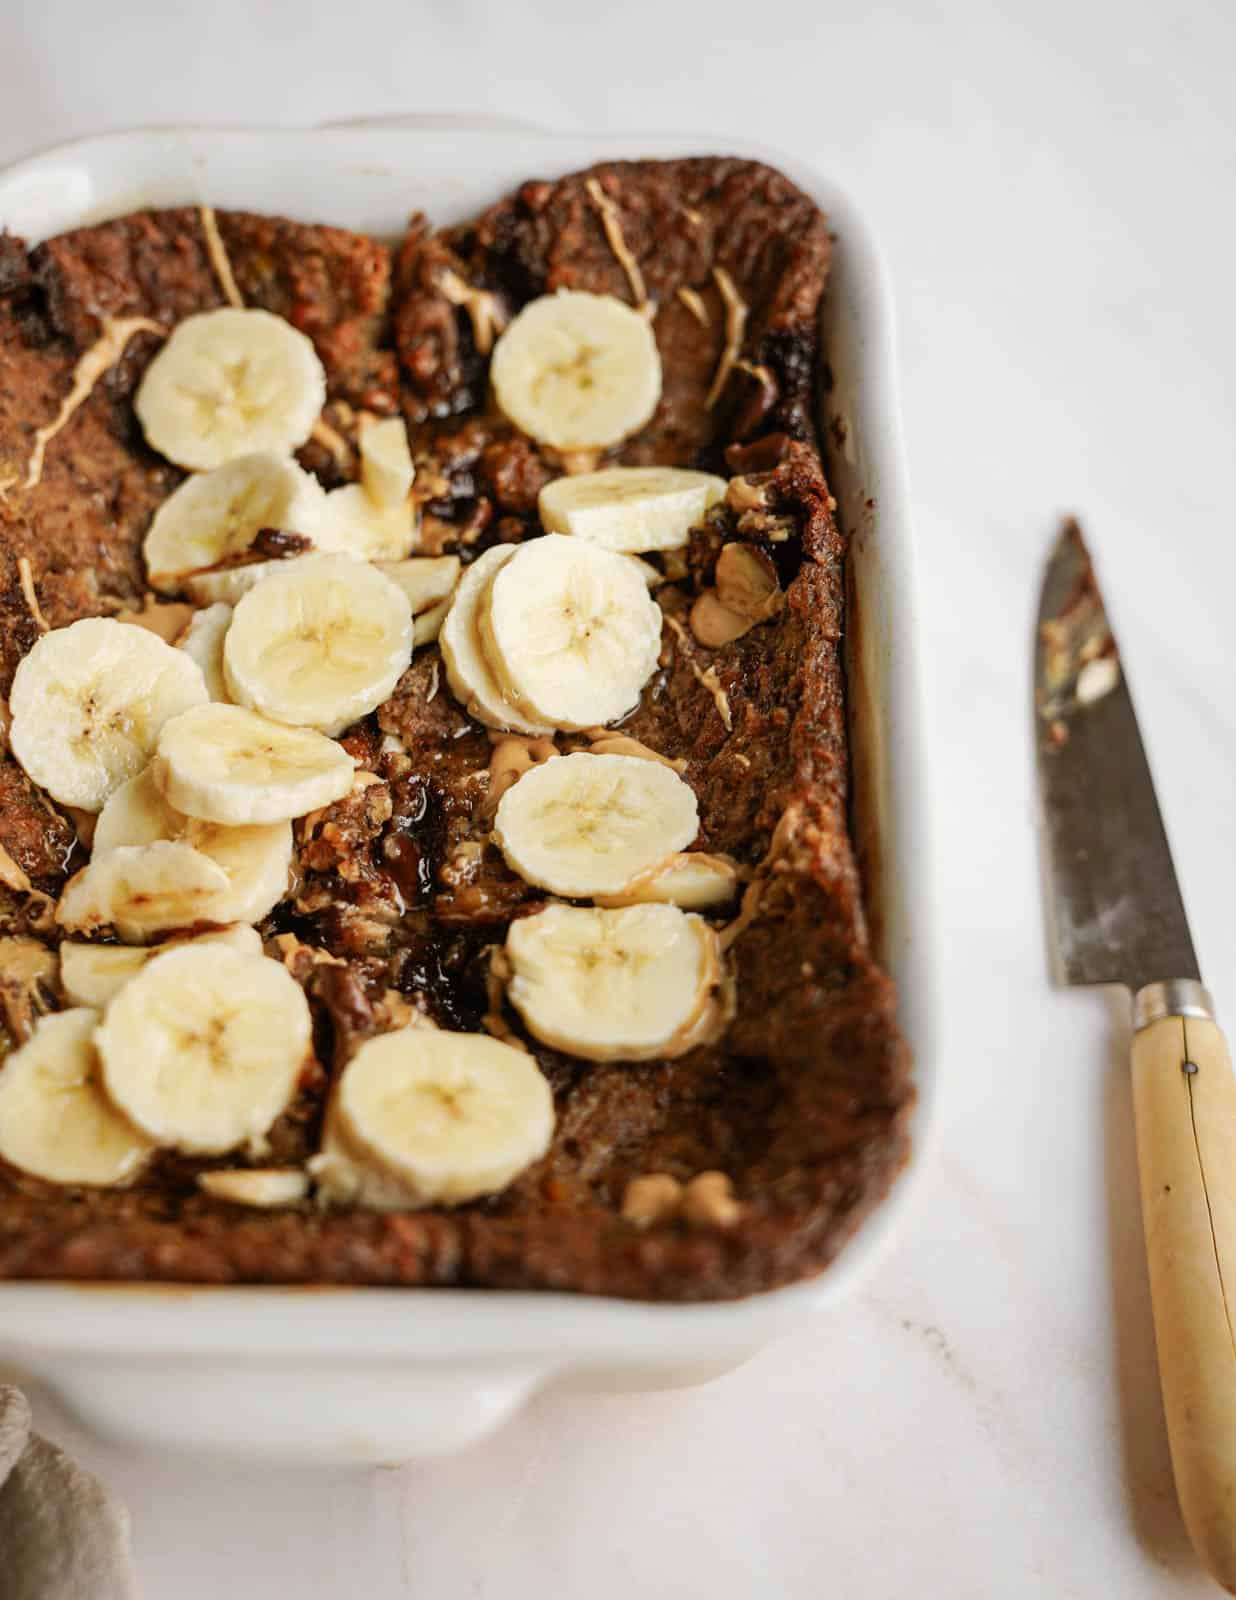 Vegan baked oatmeal with bananas cut on top.